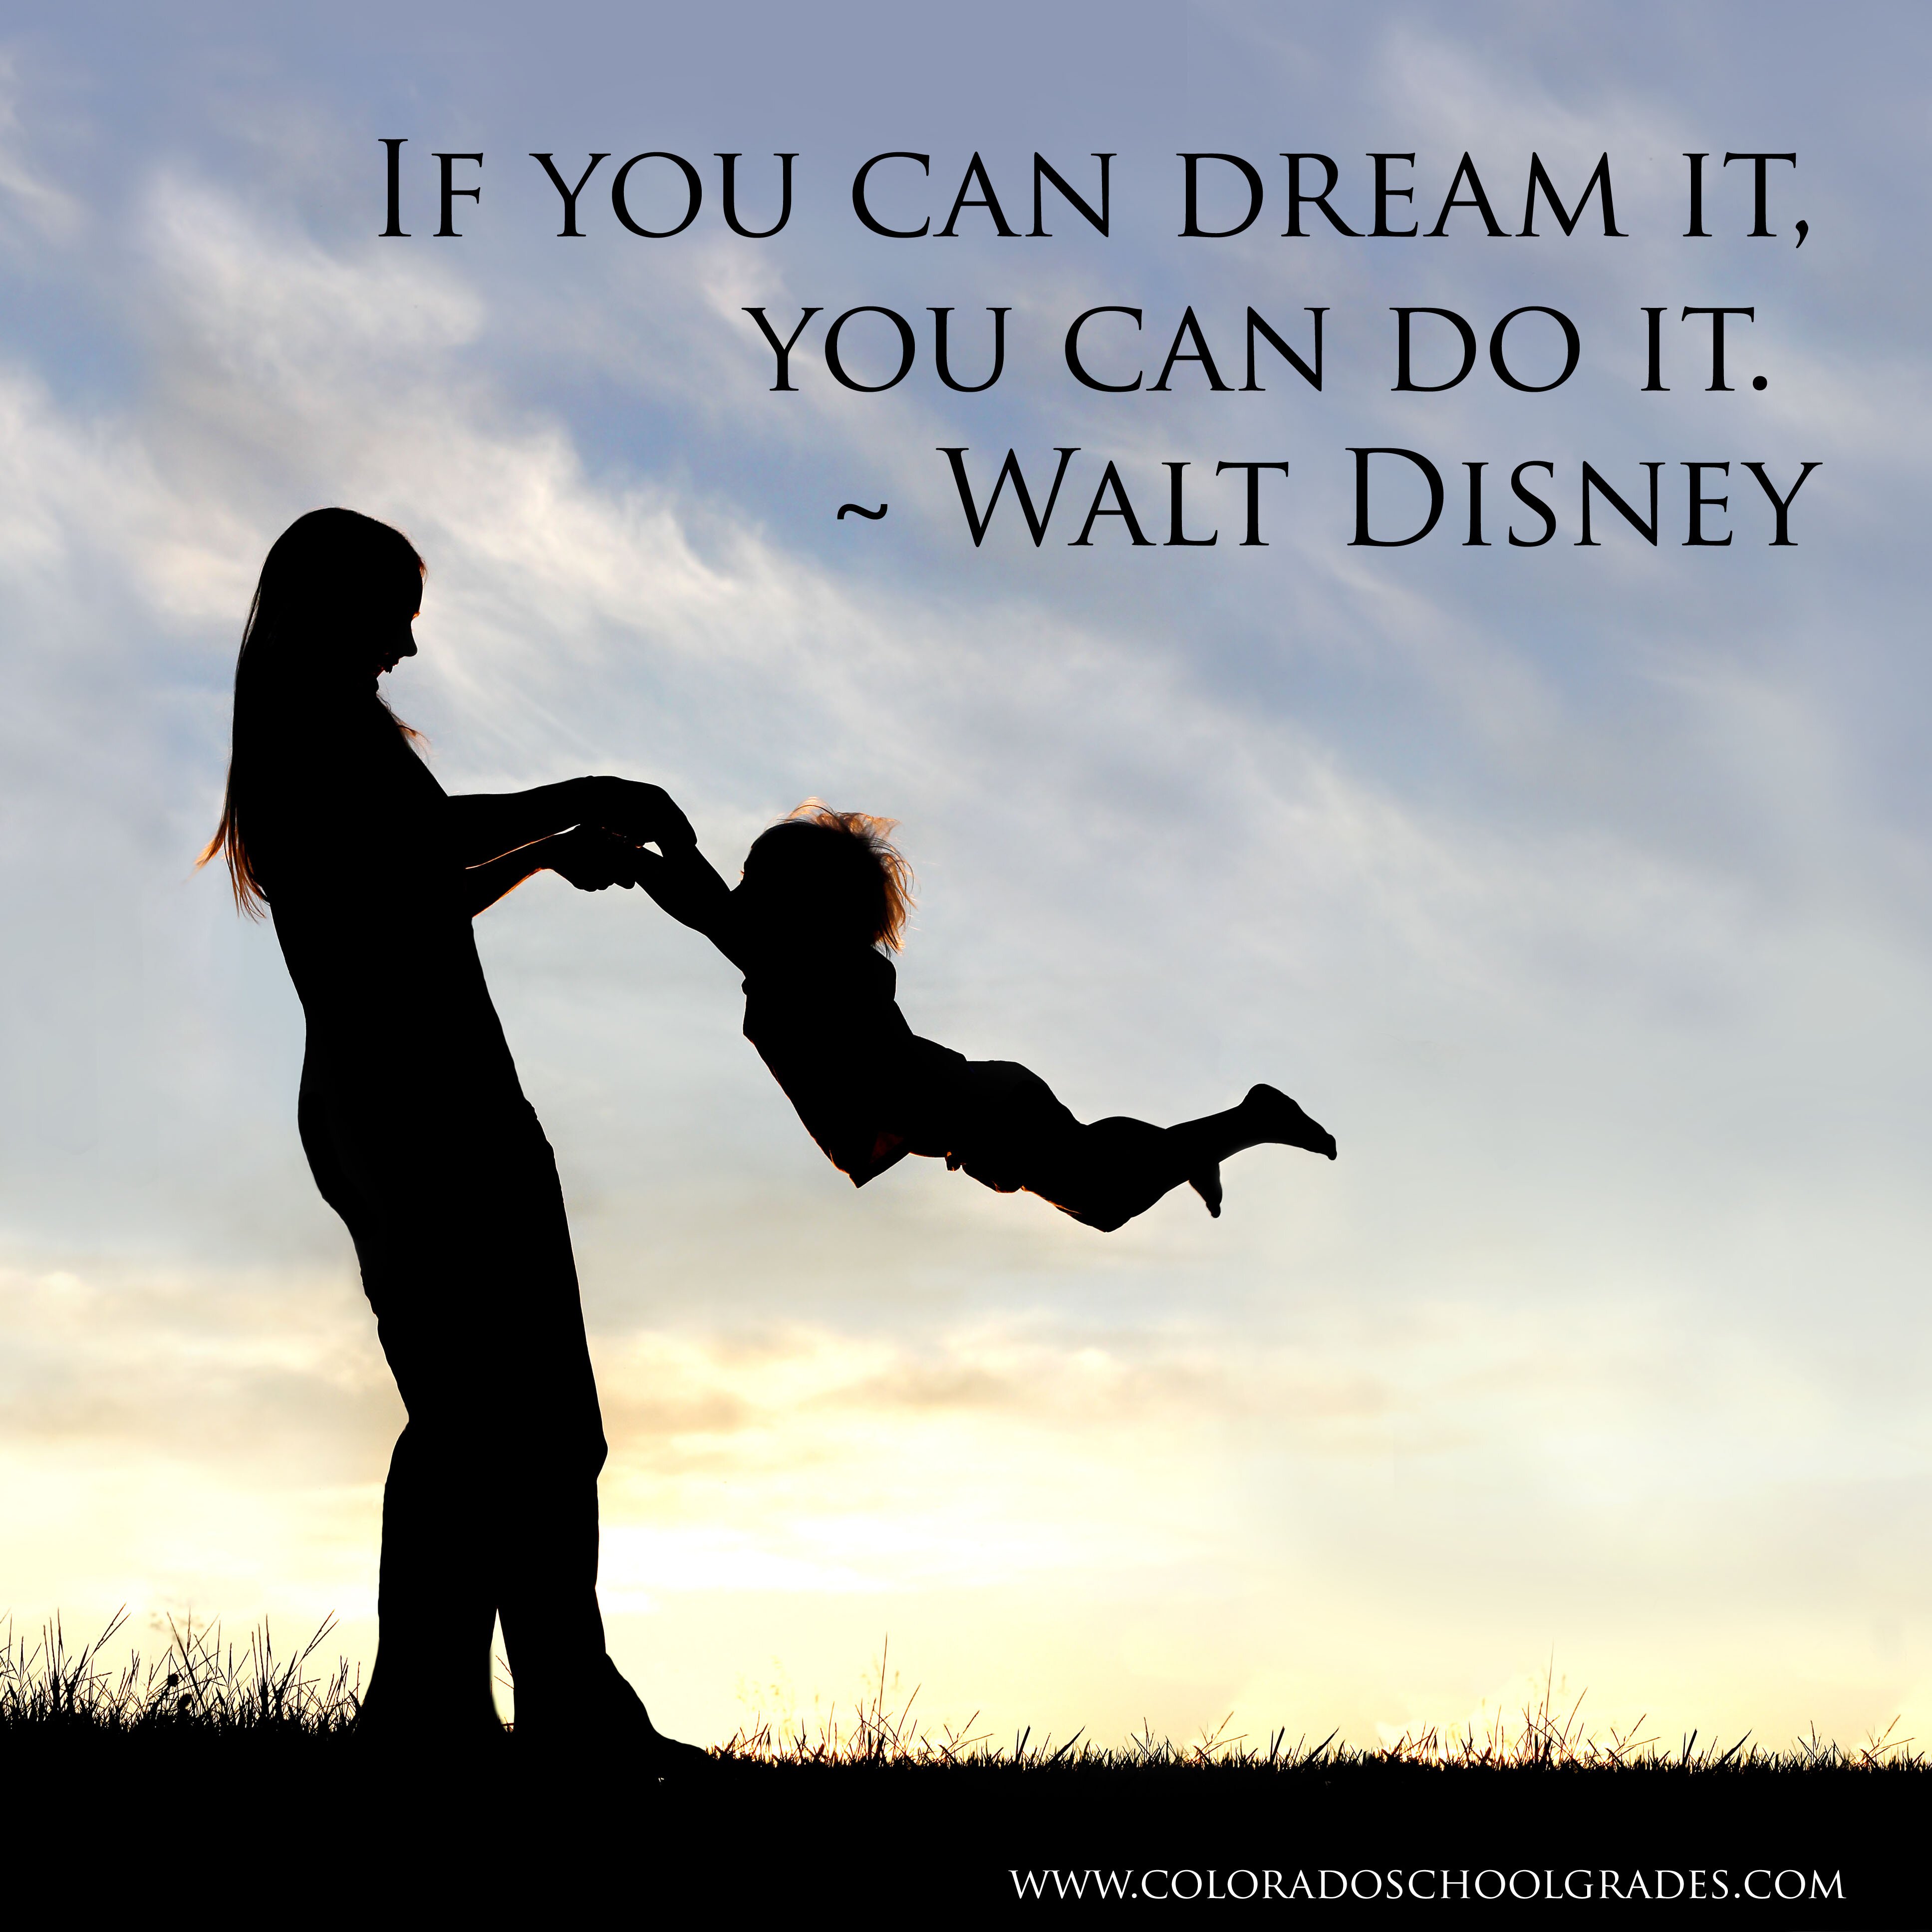 If you can dream it - Disney